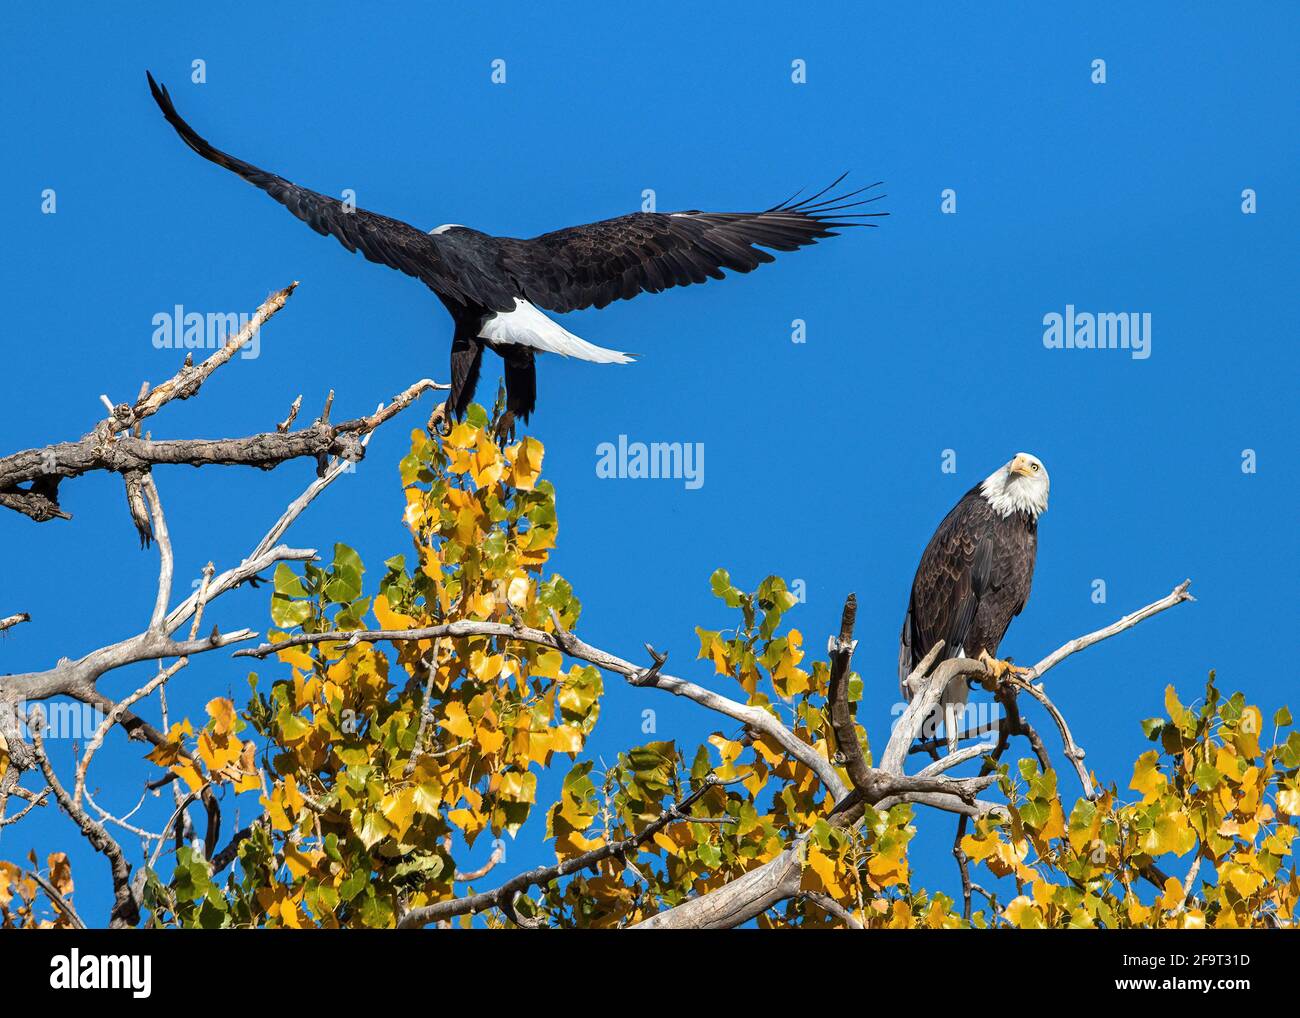 A Bald Eagle landing on a Cottonwood Tree as its mate watches, on a sunny, blue sky day in the Fall Season in Colorado, USA. Stock Photo